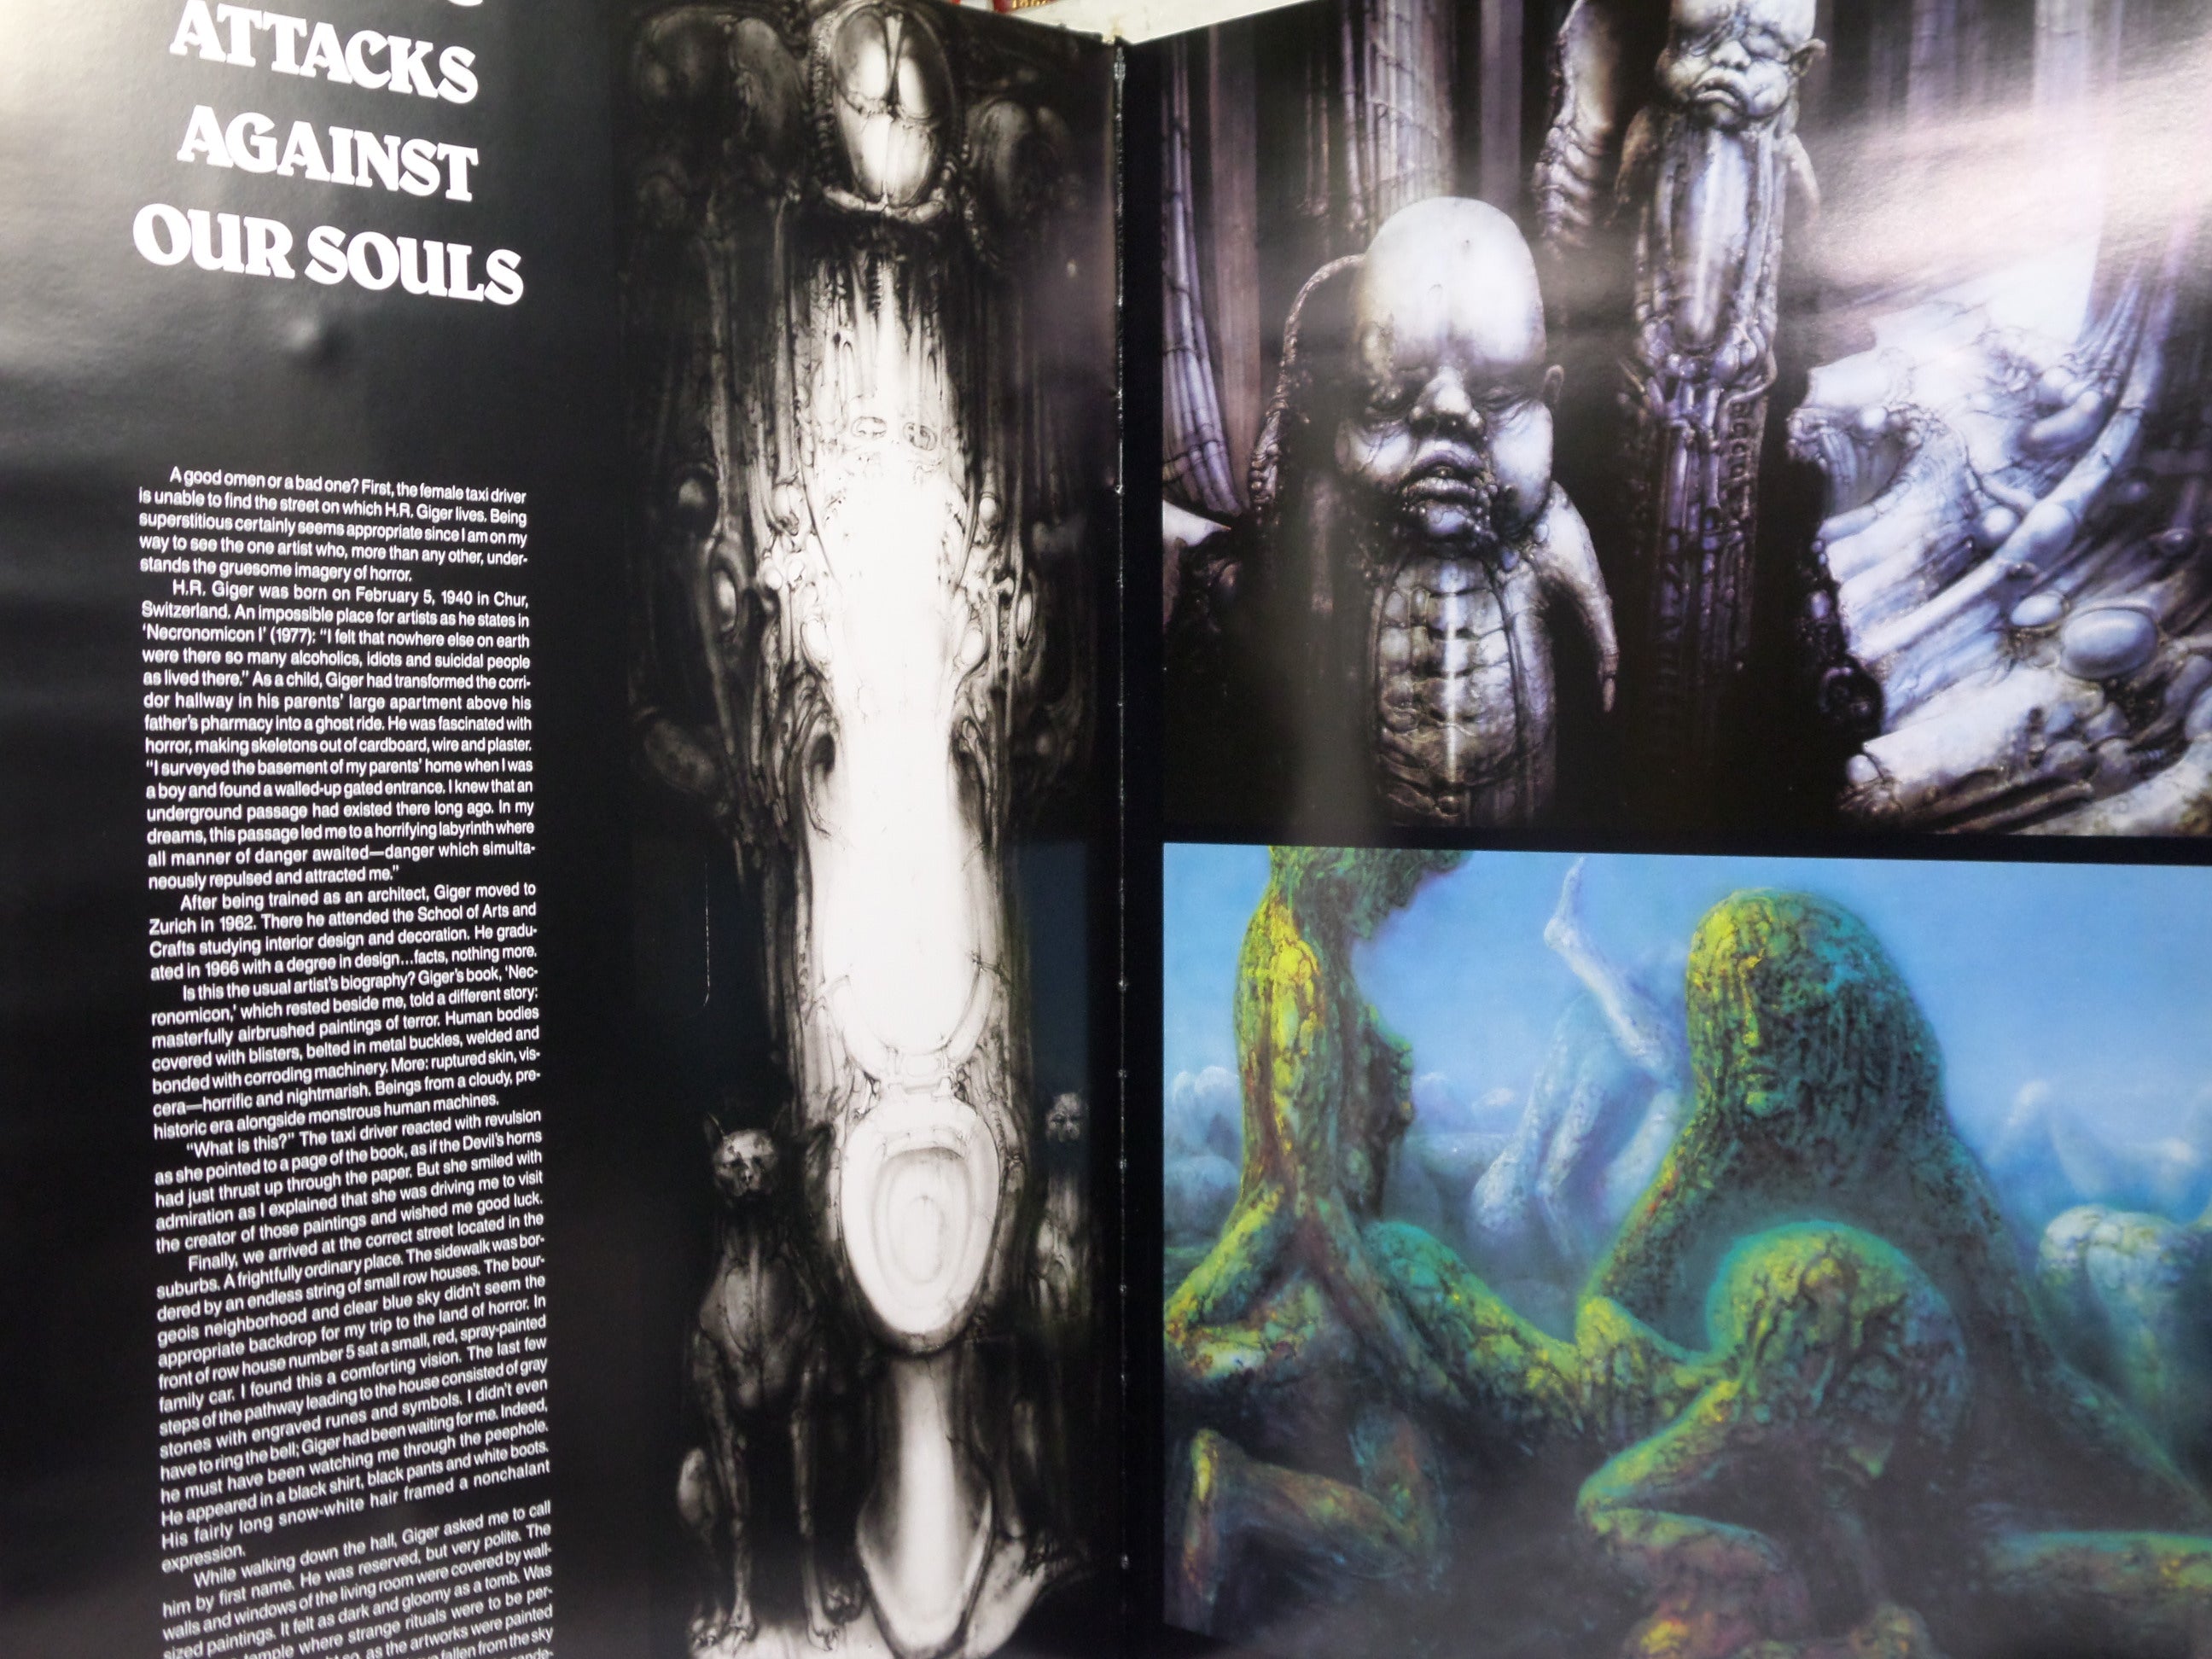 H.R. GIGER'S NECRONOMICON II 2005 HARDCOVER WITH DUST JACKET